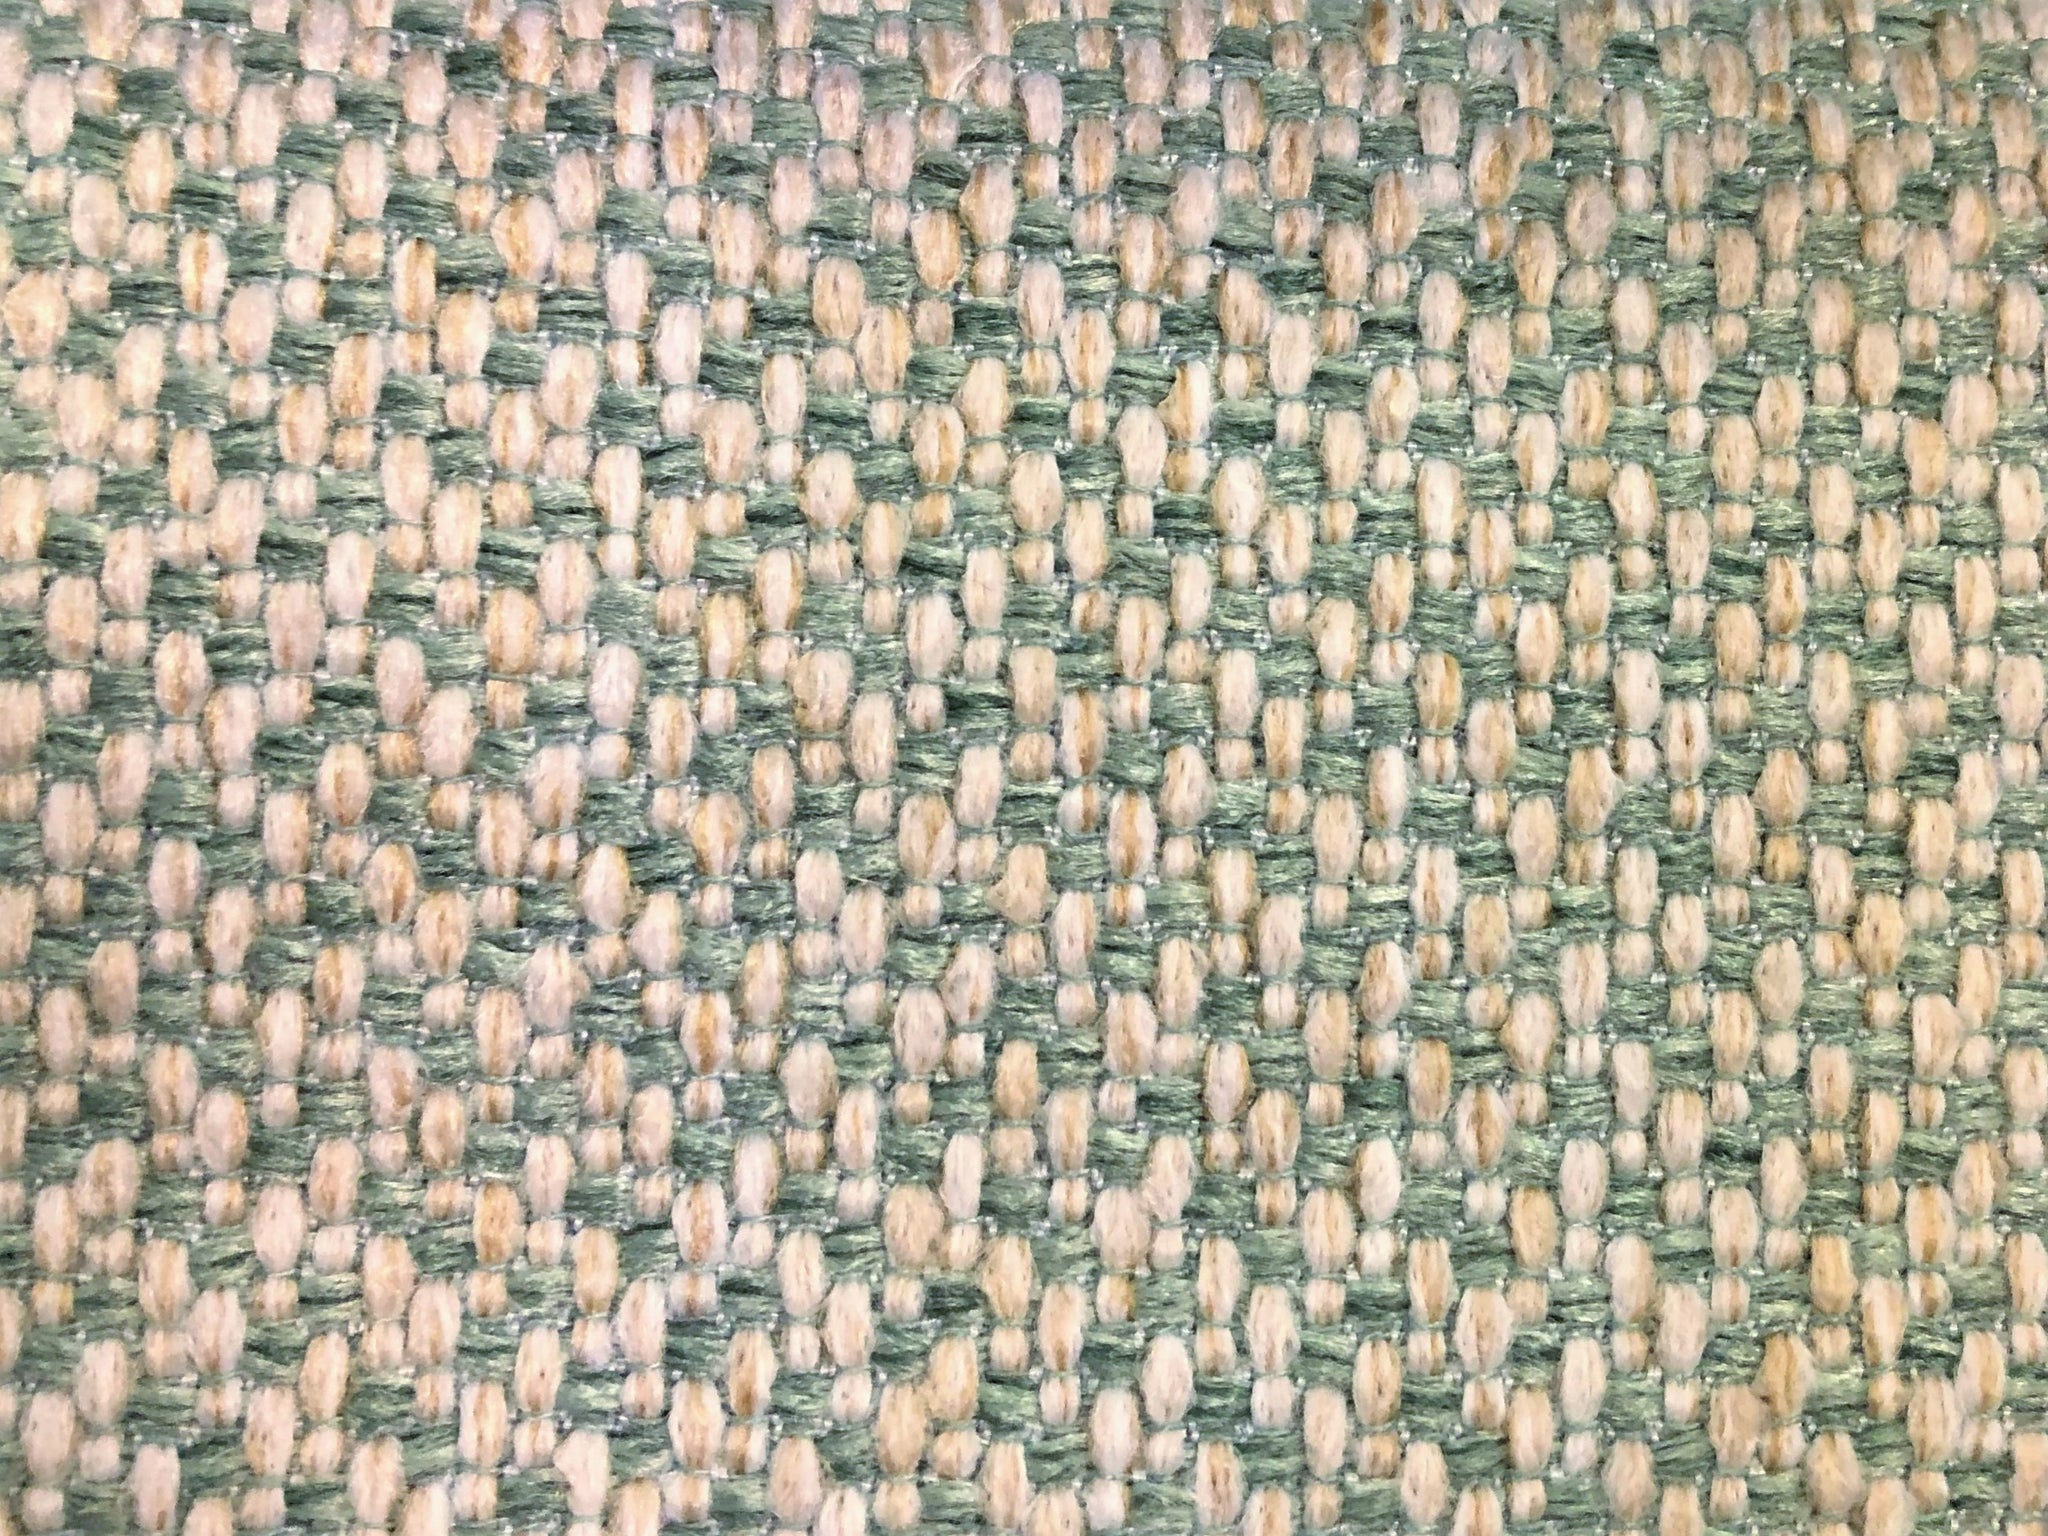 Mint Green Fine Cotton Tweed Fabric, Tweed Fabric by the Yard for Clothing,  for Jacket Dress Skirt Fabric 1.64 Yards or 57 Inch Width 